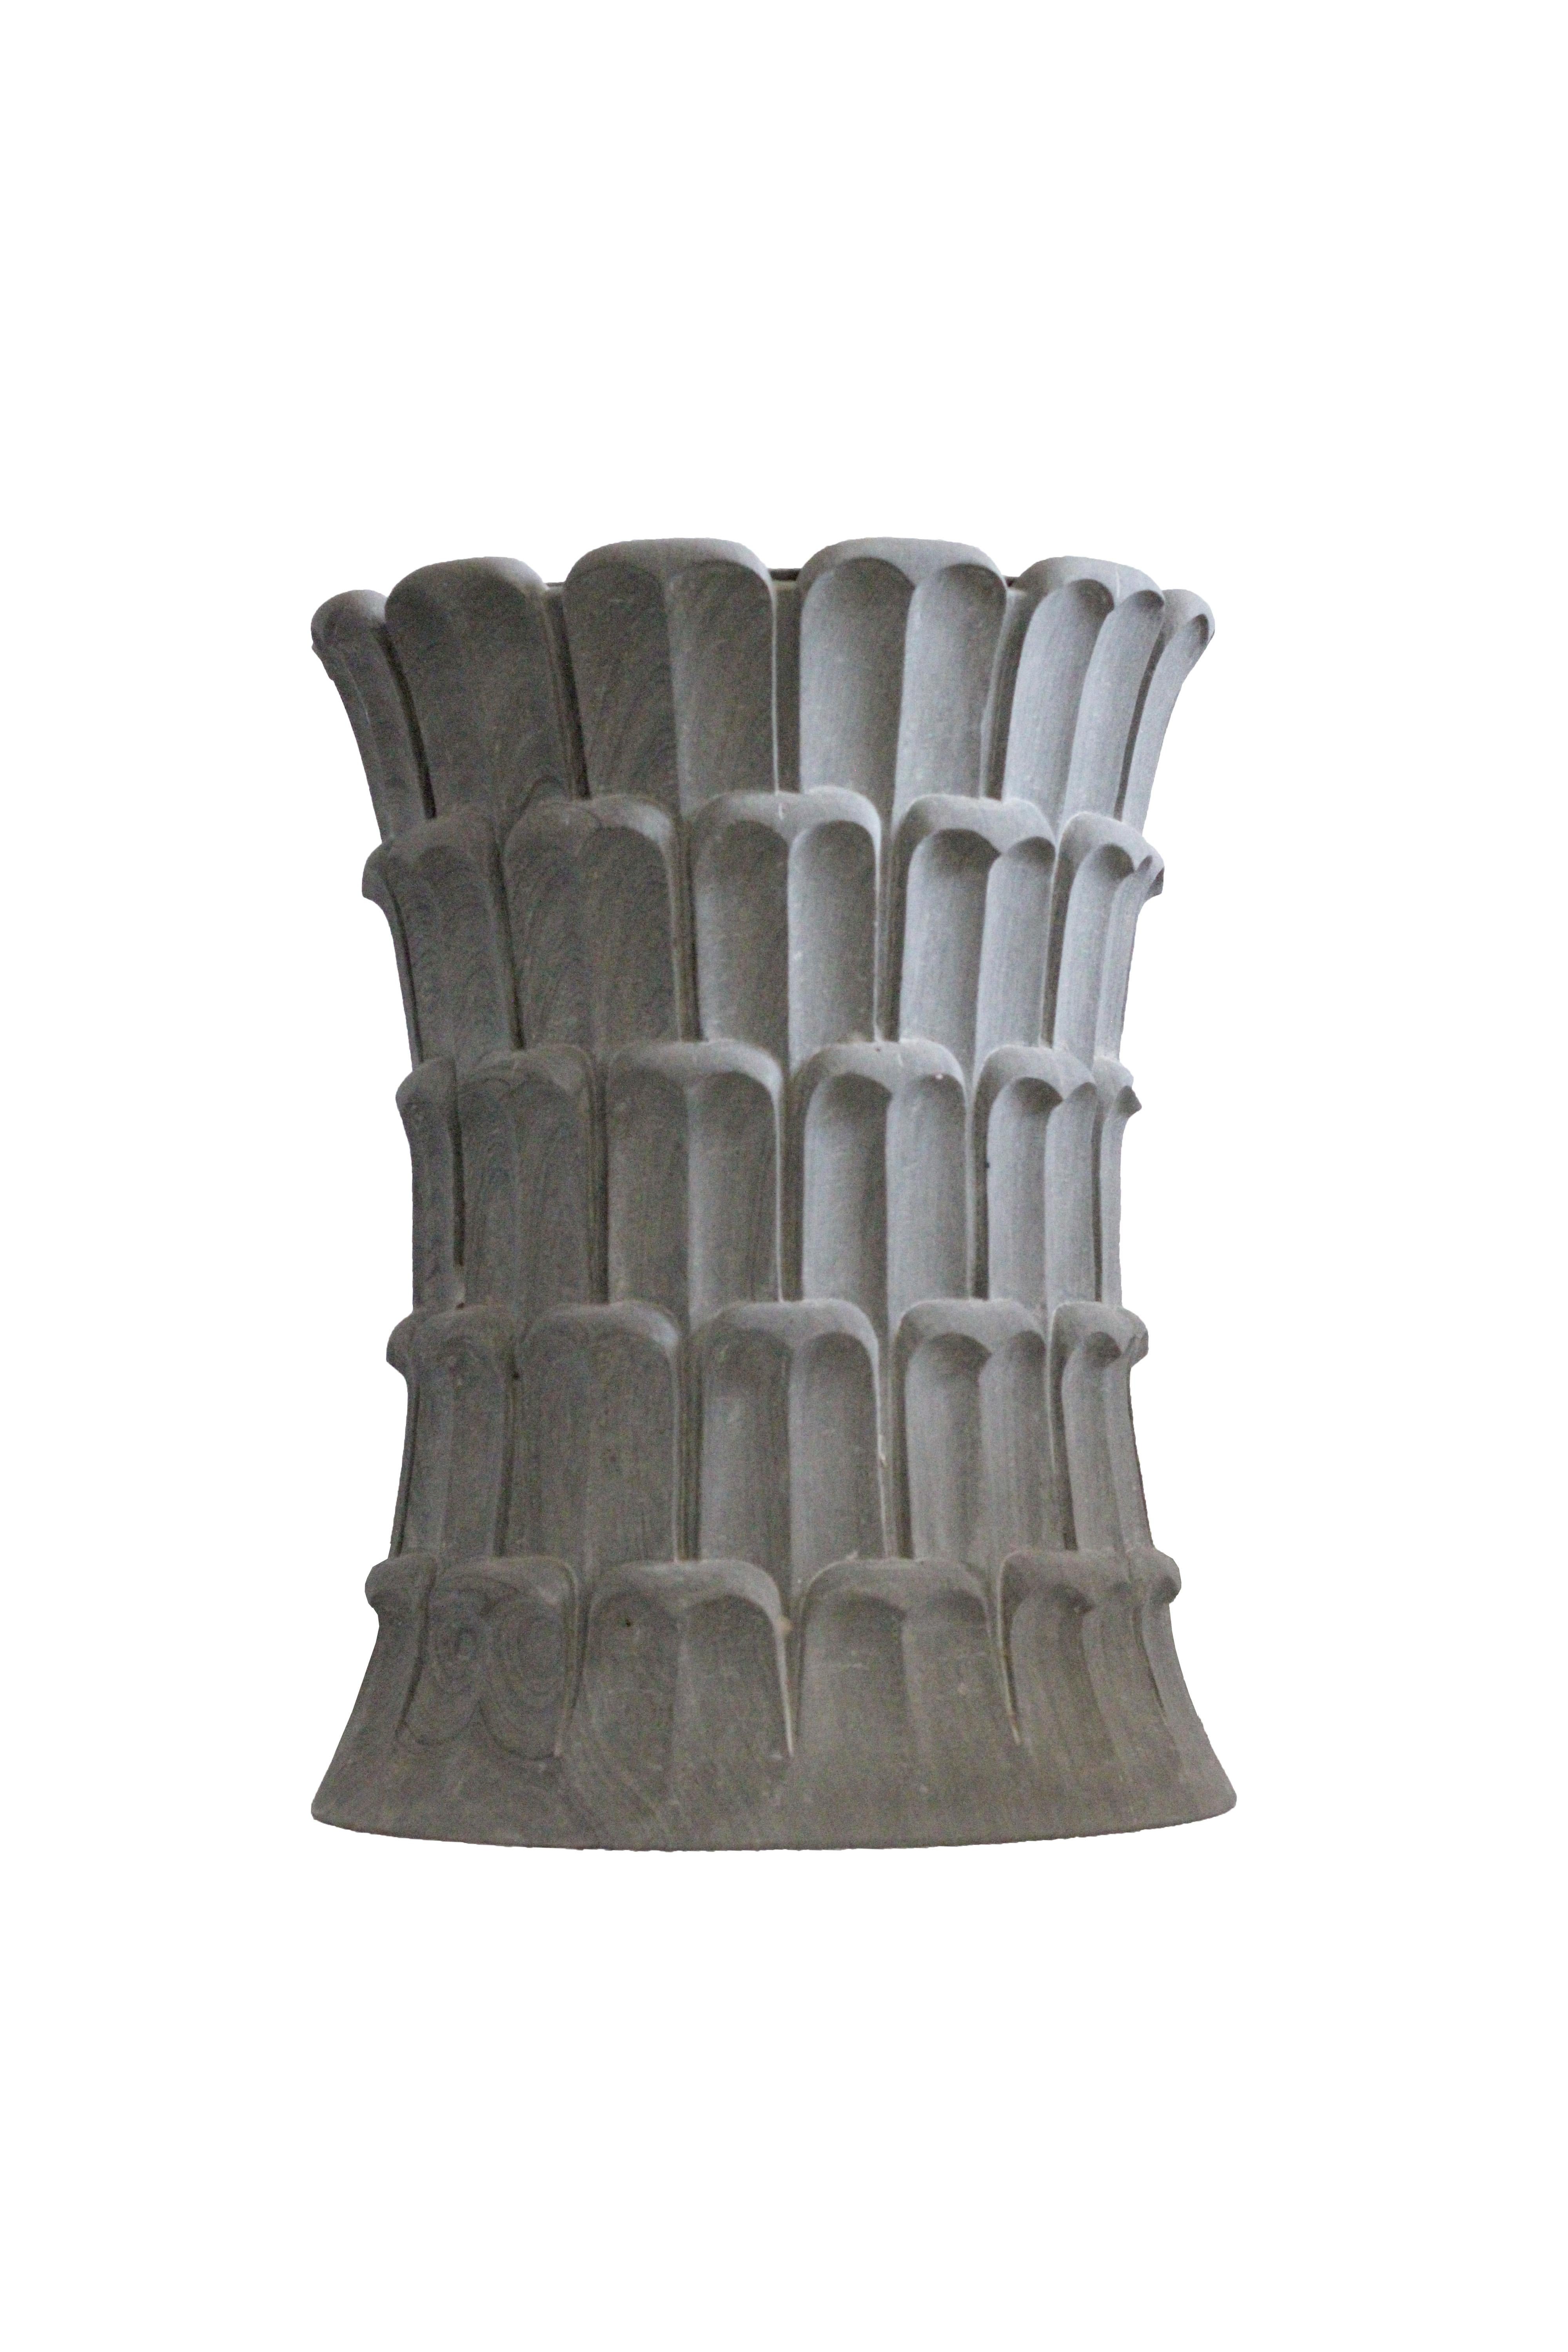 Date Palm Side Table In Agra Grey Stone Handcrafted in India For Sale 1